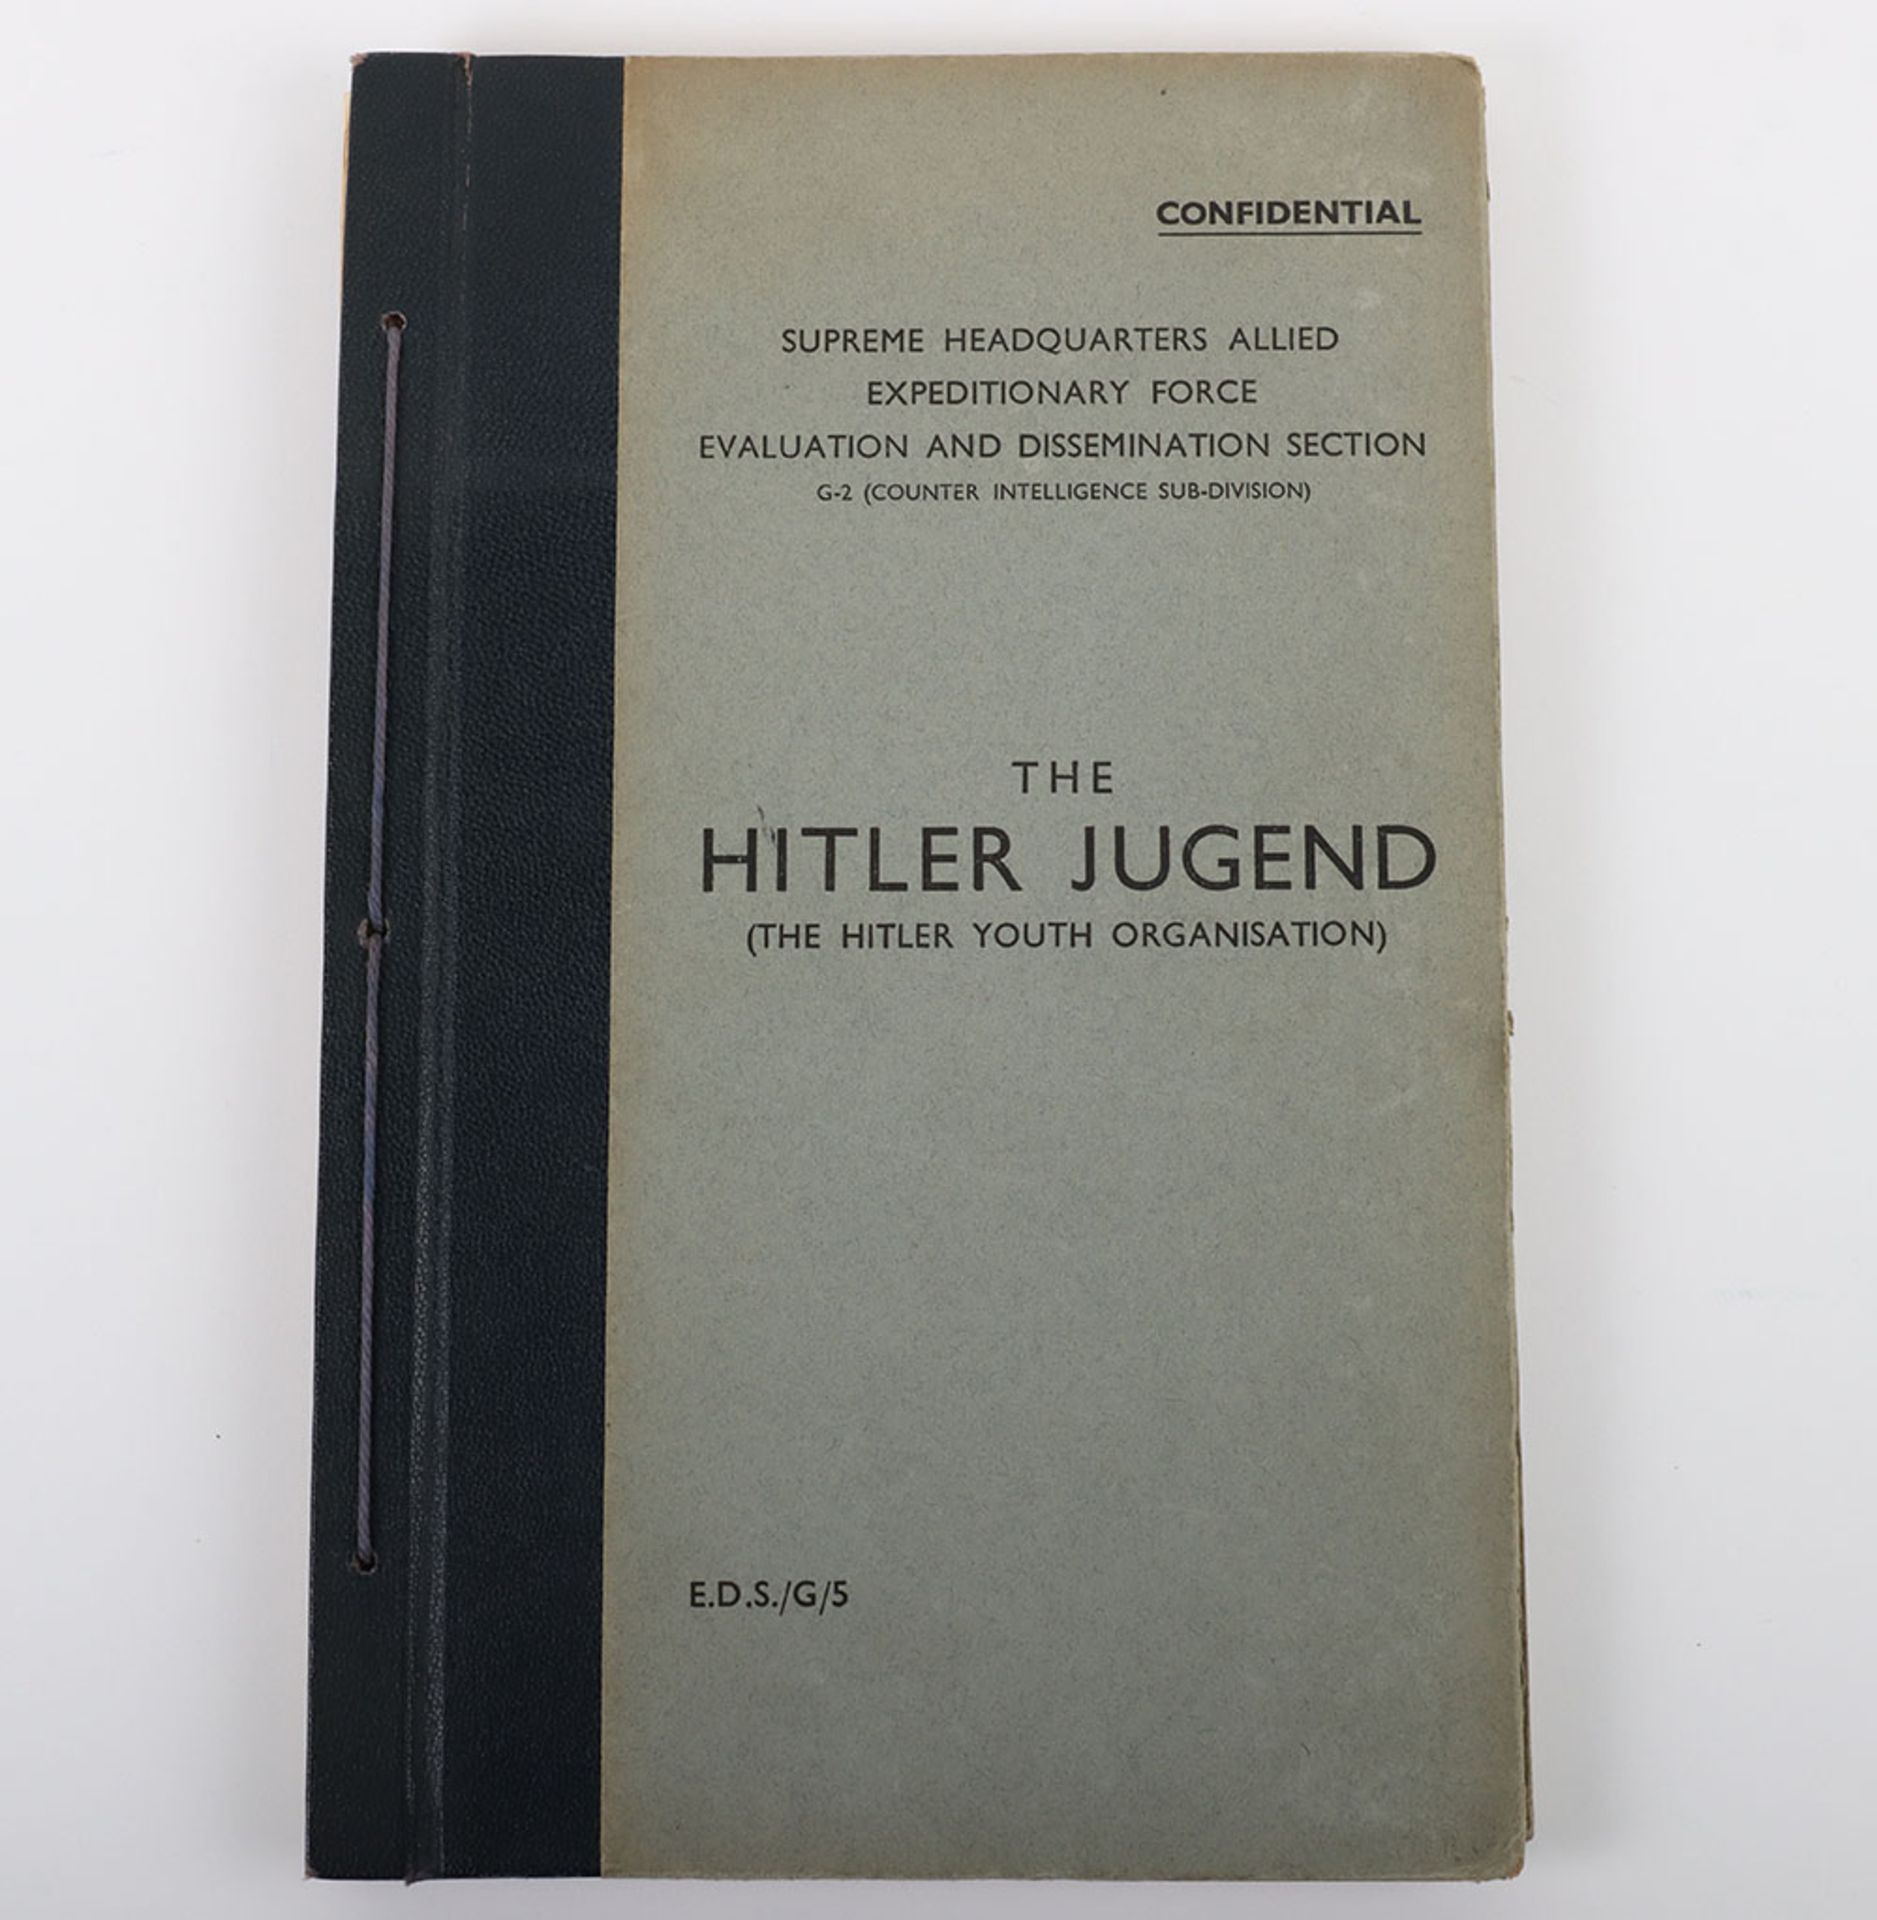 The Hitler Jugend (The Hitler Youth Organisation) Supreme Headquarters Allied Expeditionary Force. C